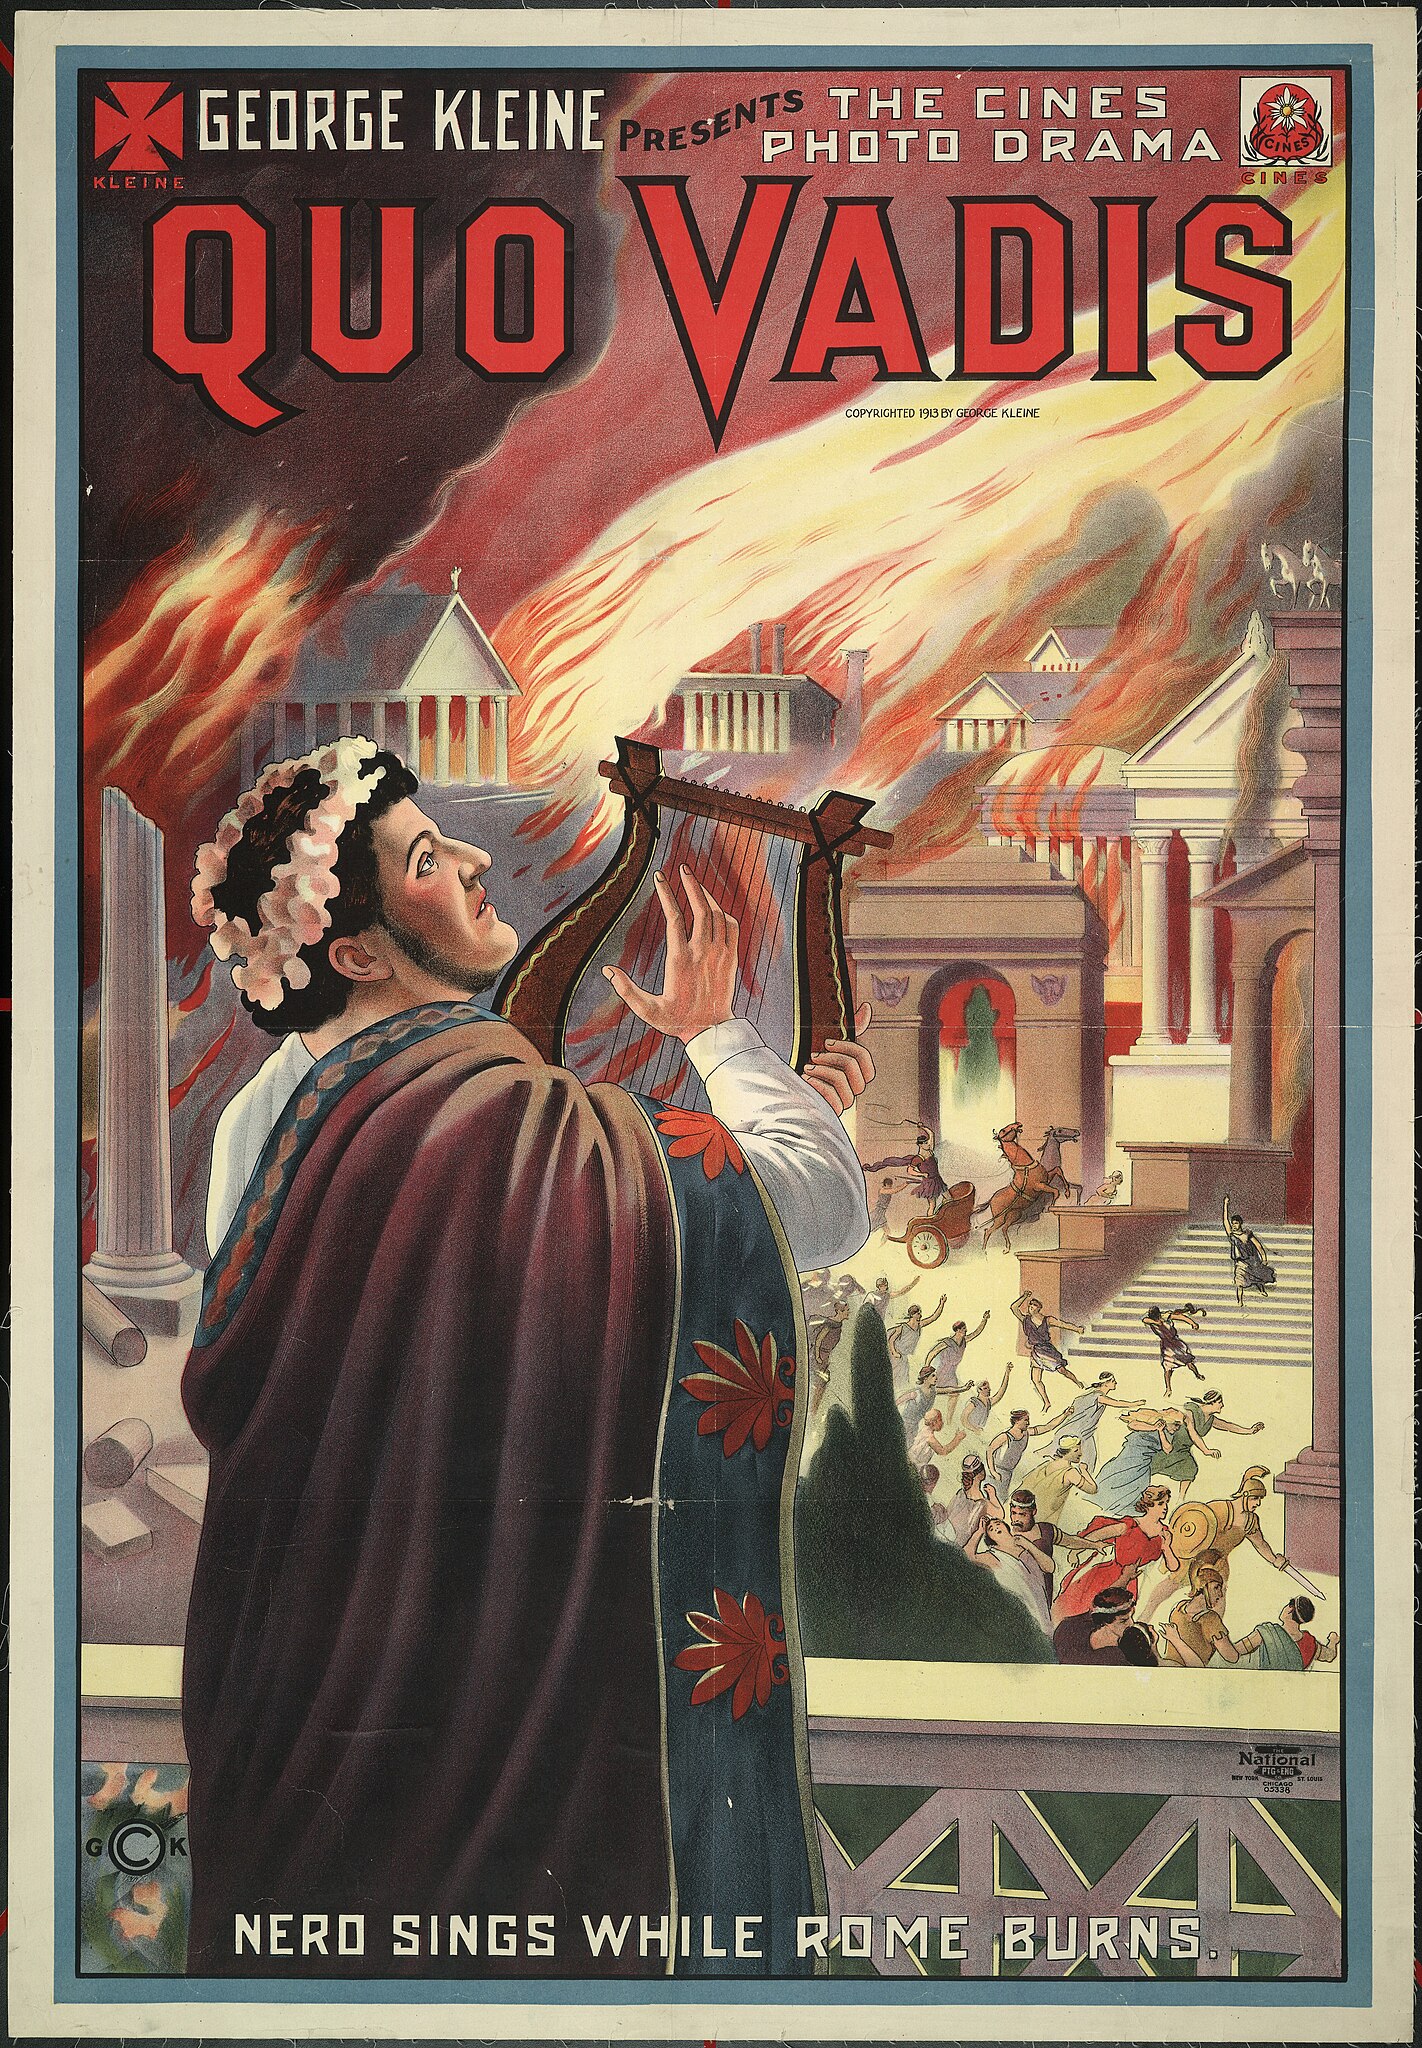 A poster featuring Nero for qo vadis.